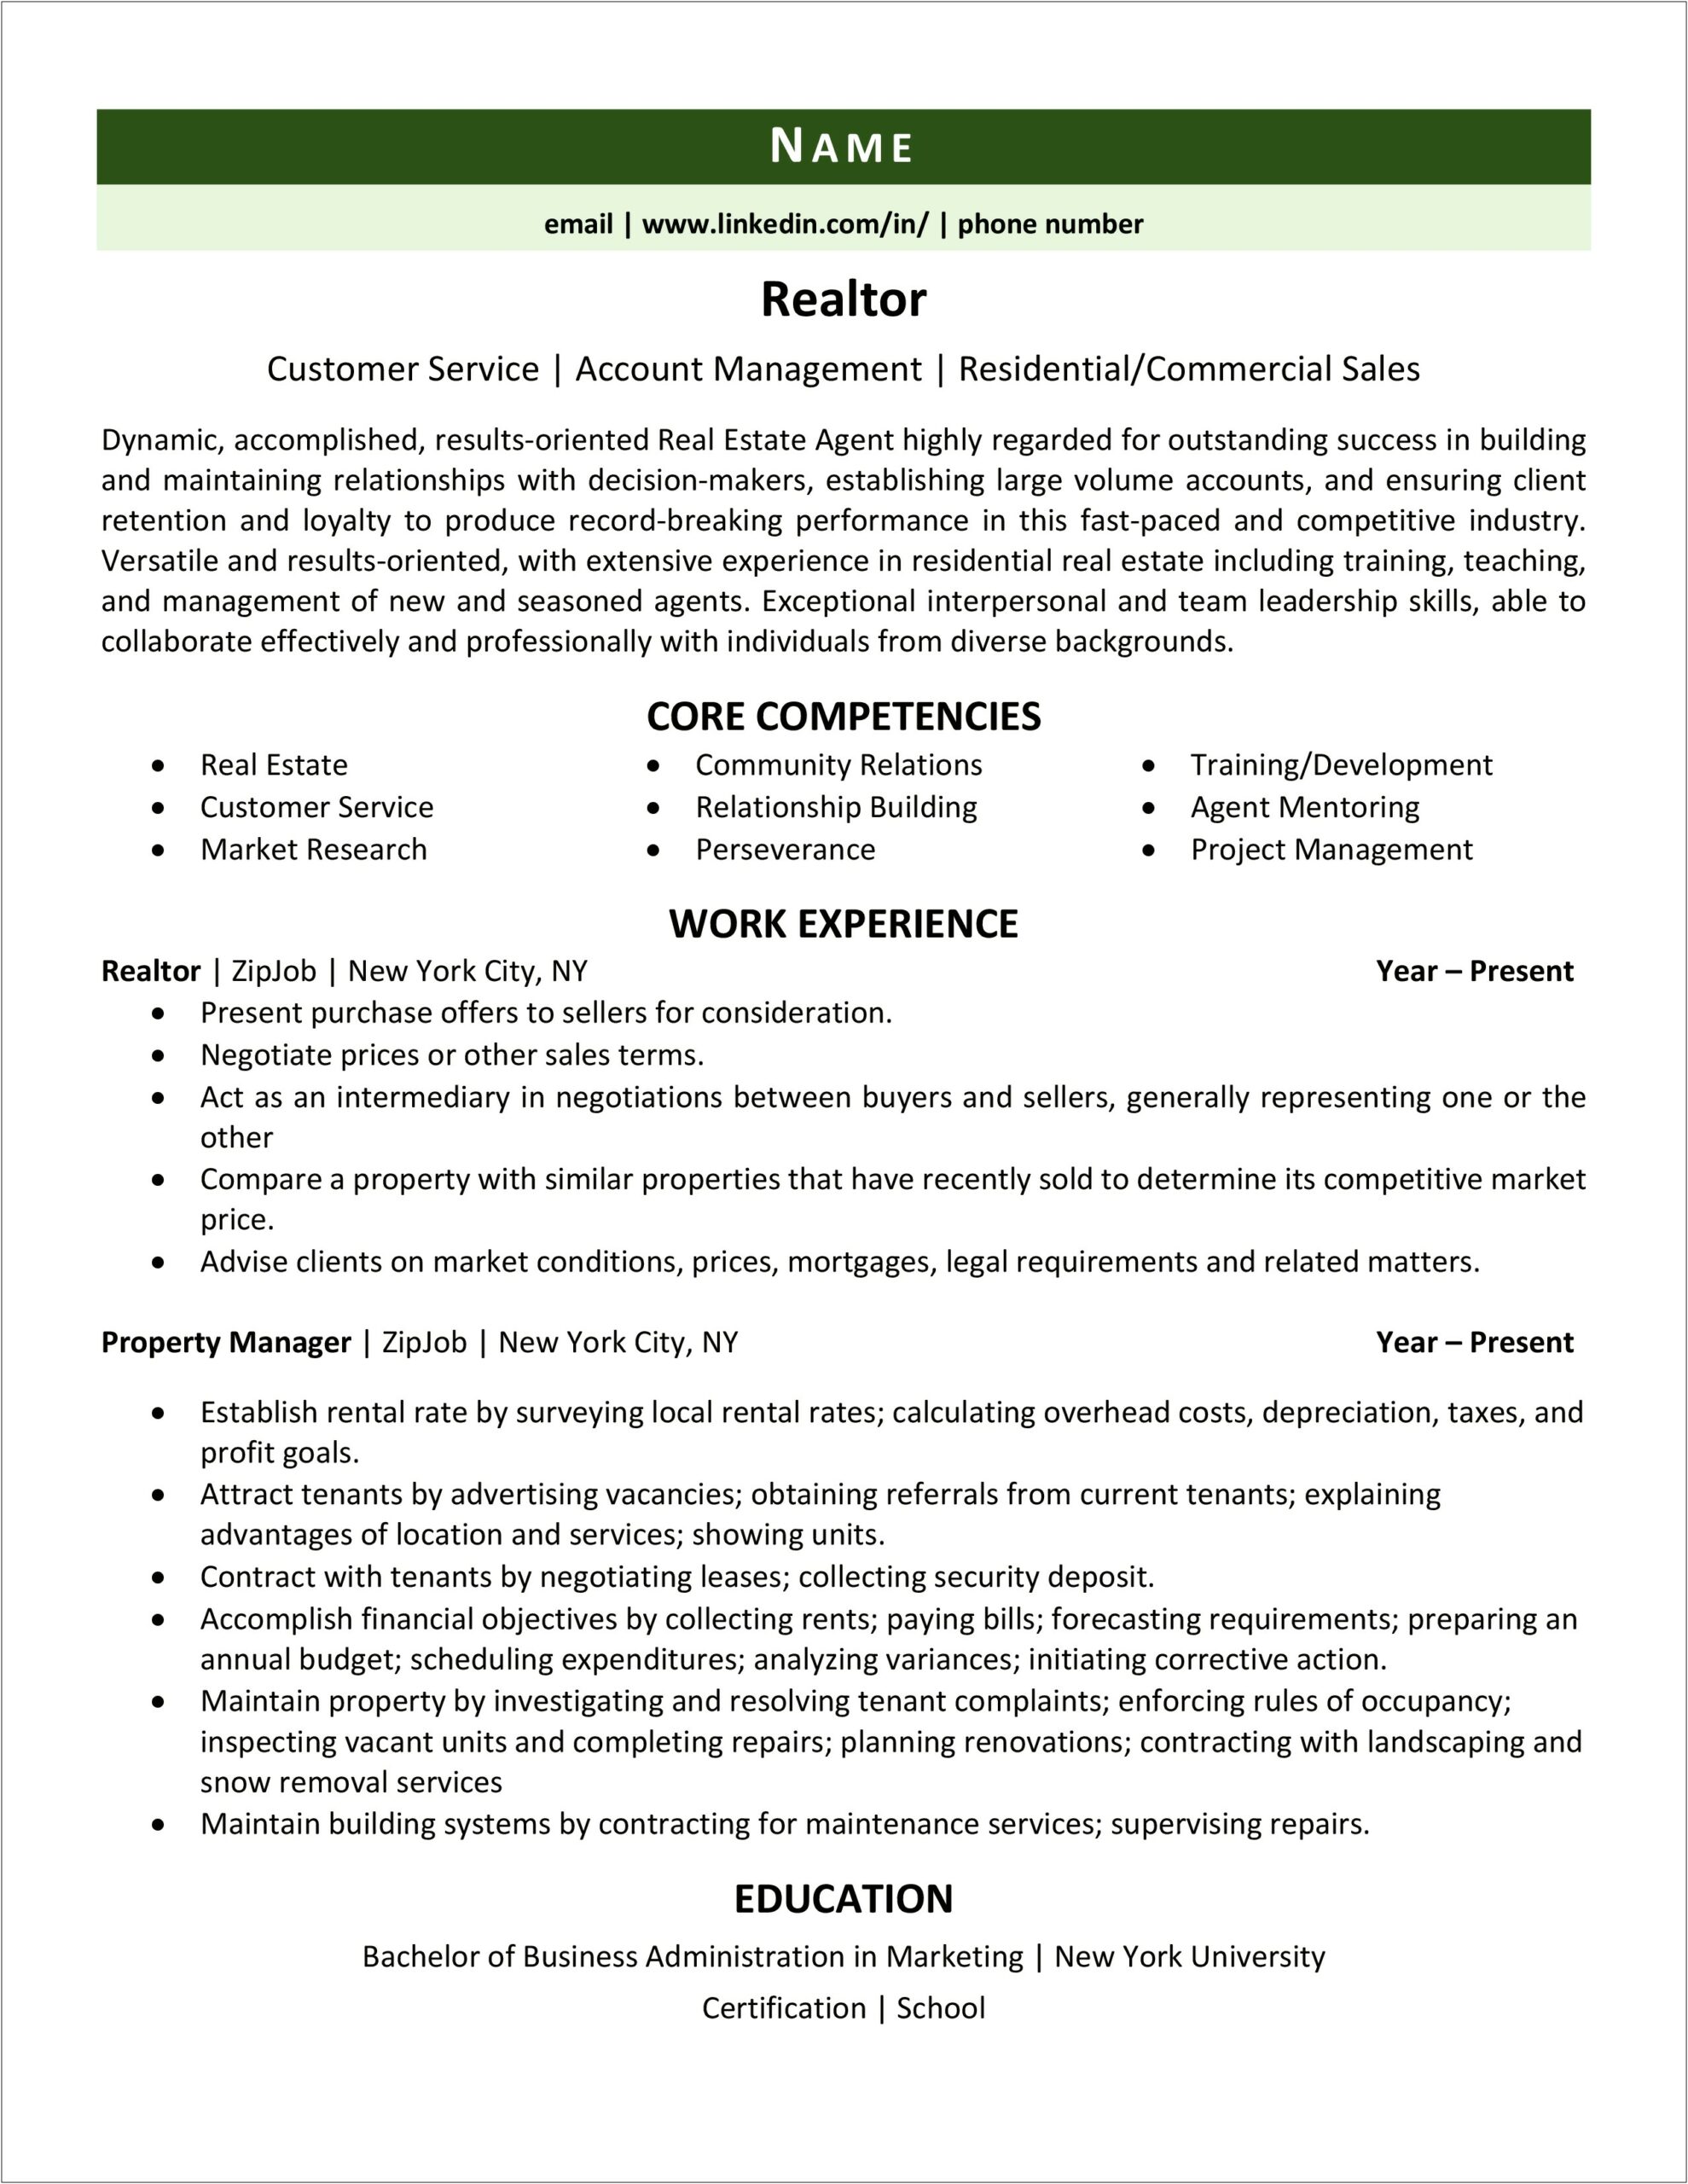 Real Estate Experience On A Resume